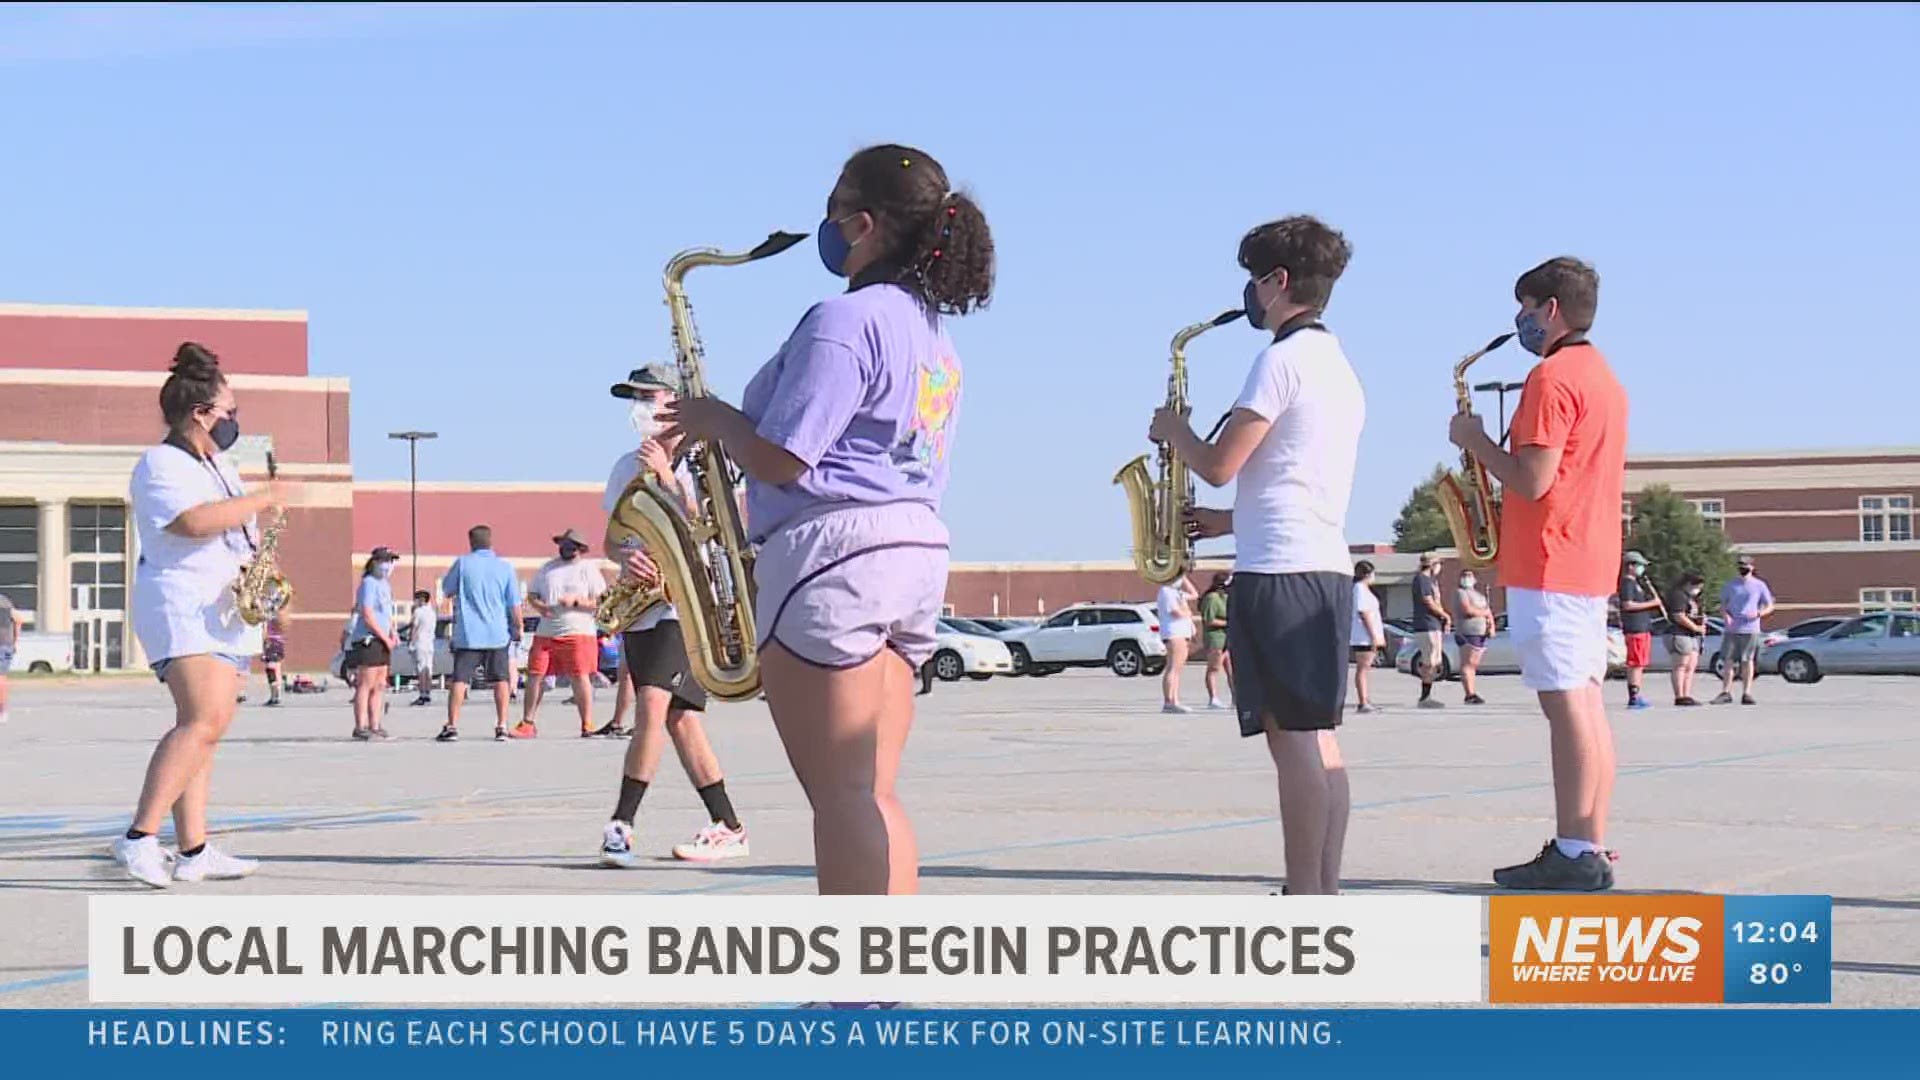 “They’re so resilient. They’re excited and happy to be able to teach each other, learn and get better,” said Band Director, Jeremy Ford.